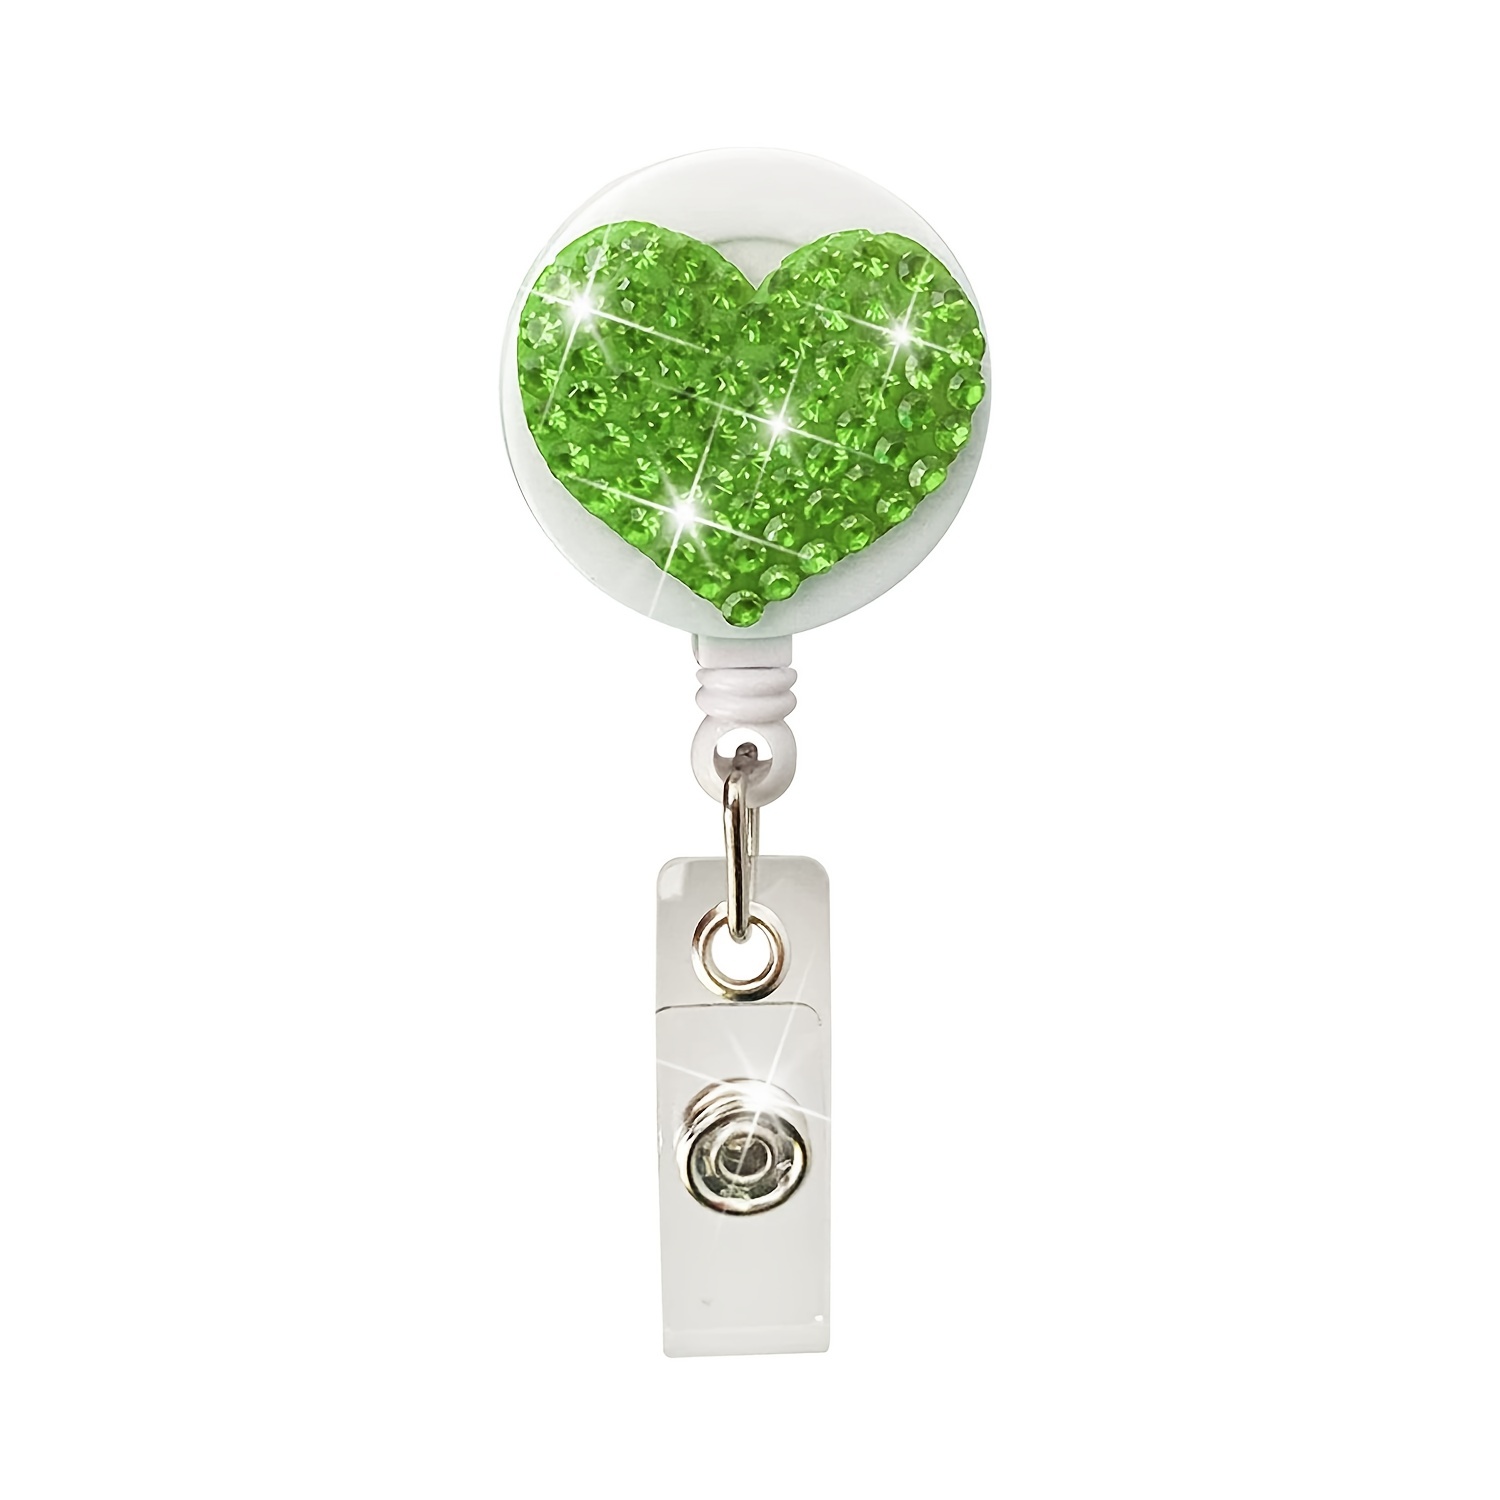 5 Pack - Cute Heart Shaped Retractable Badge Reels with 360° Swivel  Alligator Pinch Clip - Great Name Badge Holder for Nurses, Teachers, DIY  Bling 